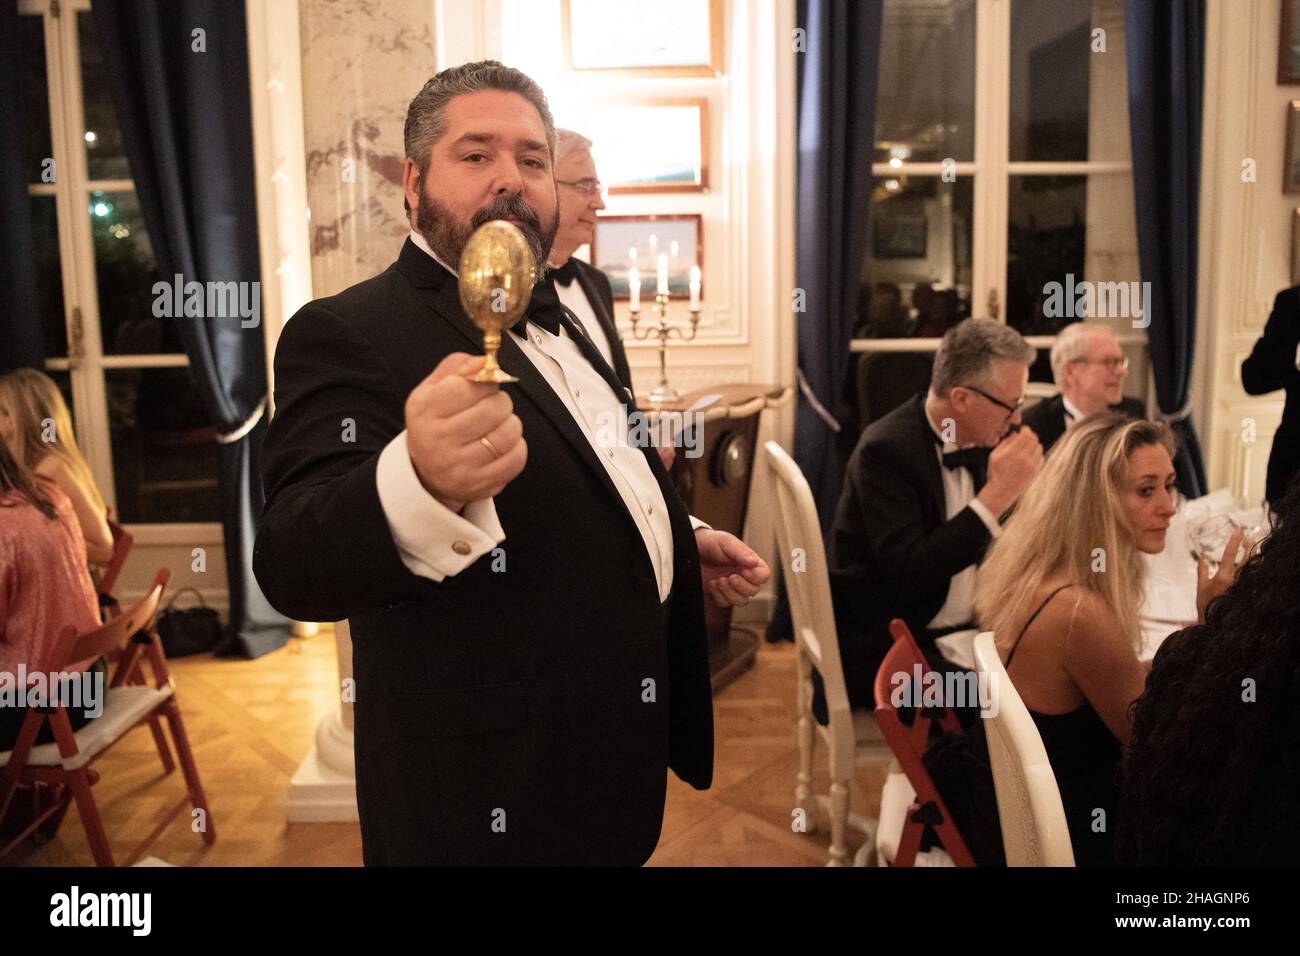 Grand Duke George Mikhailovich of Russia, (Georgi Mikhailovich Romanov) attends the dinner organized by the Assembly of the Russian Nobility in France (A.N.R.F), President Prince Stephane Belosselsky at the Yacth Club de France, on December 10, 2021 in Paris, France. Photo by David Niviere/ABACAPRESS.COM Stock Photo